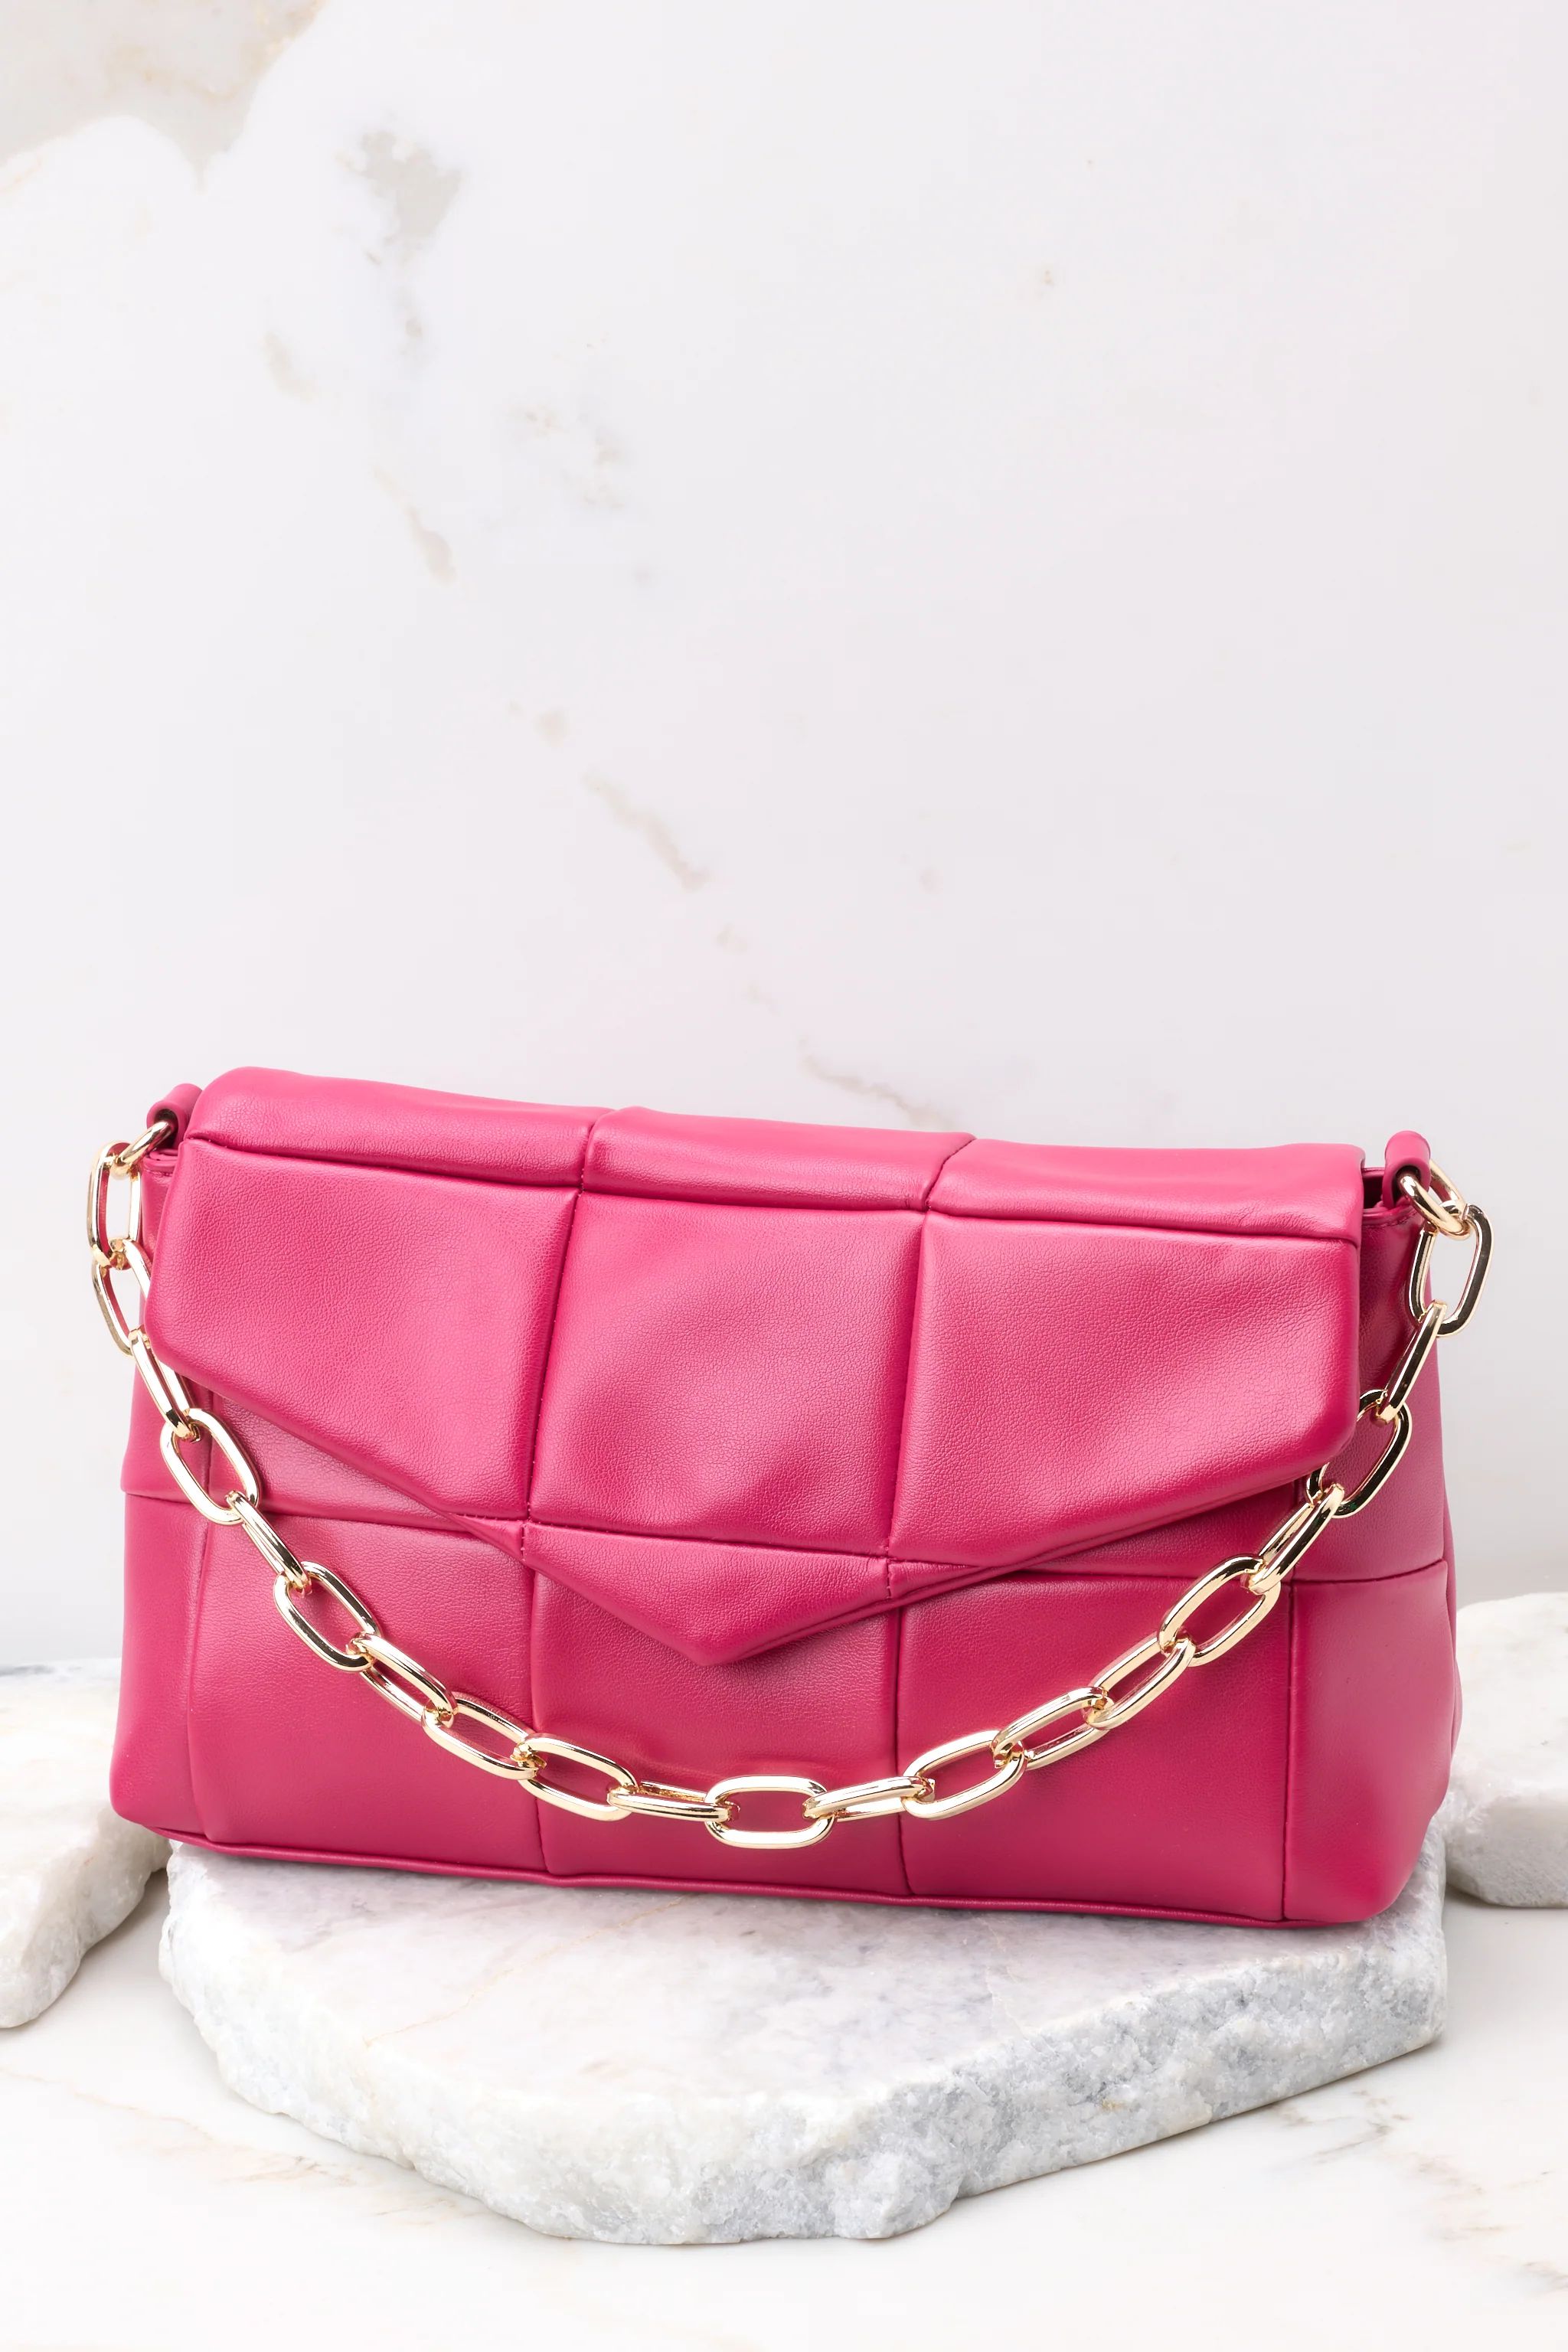 Captivatingly Chic Fuchsia Pink Bag | Red Dress 